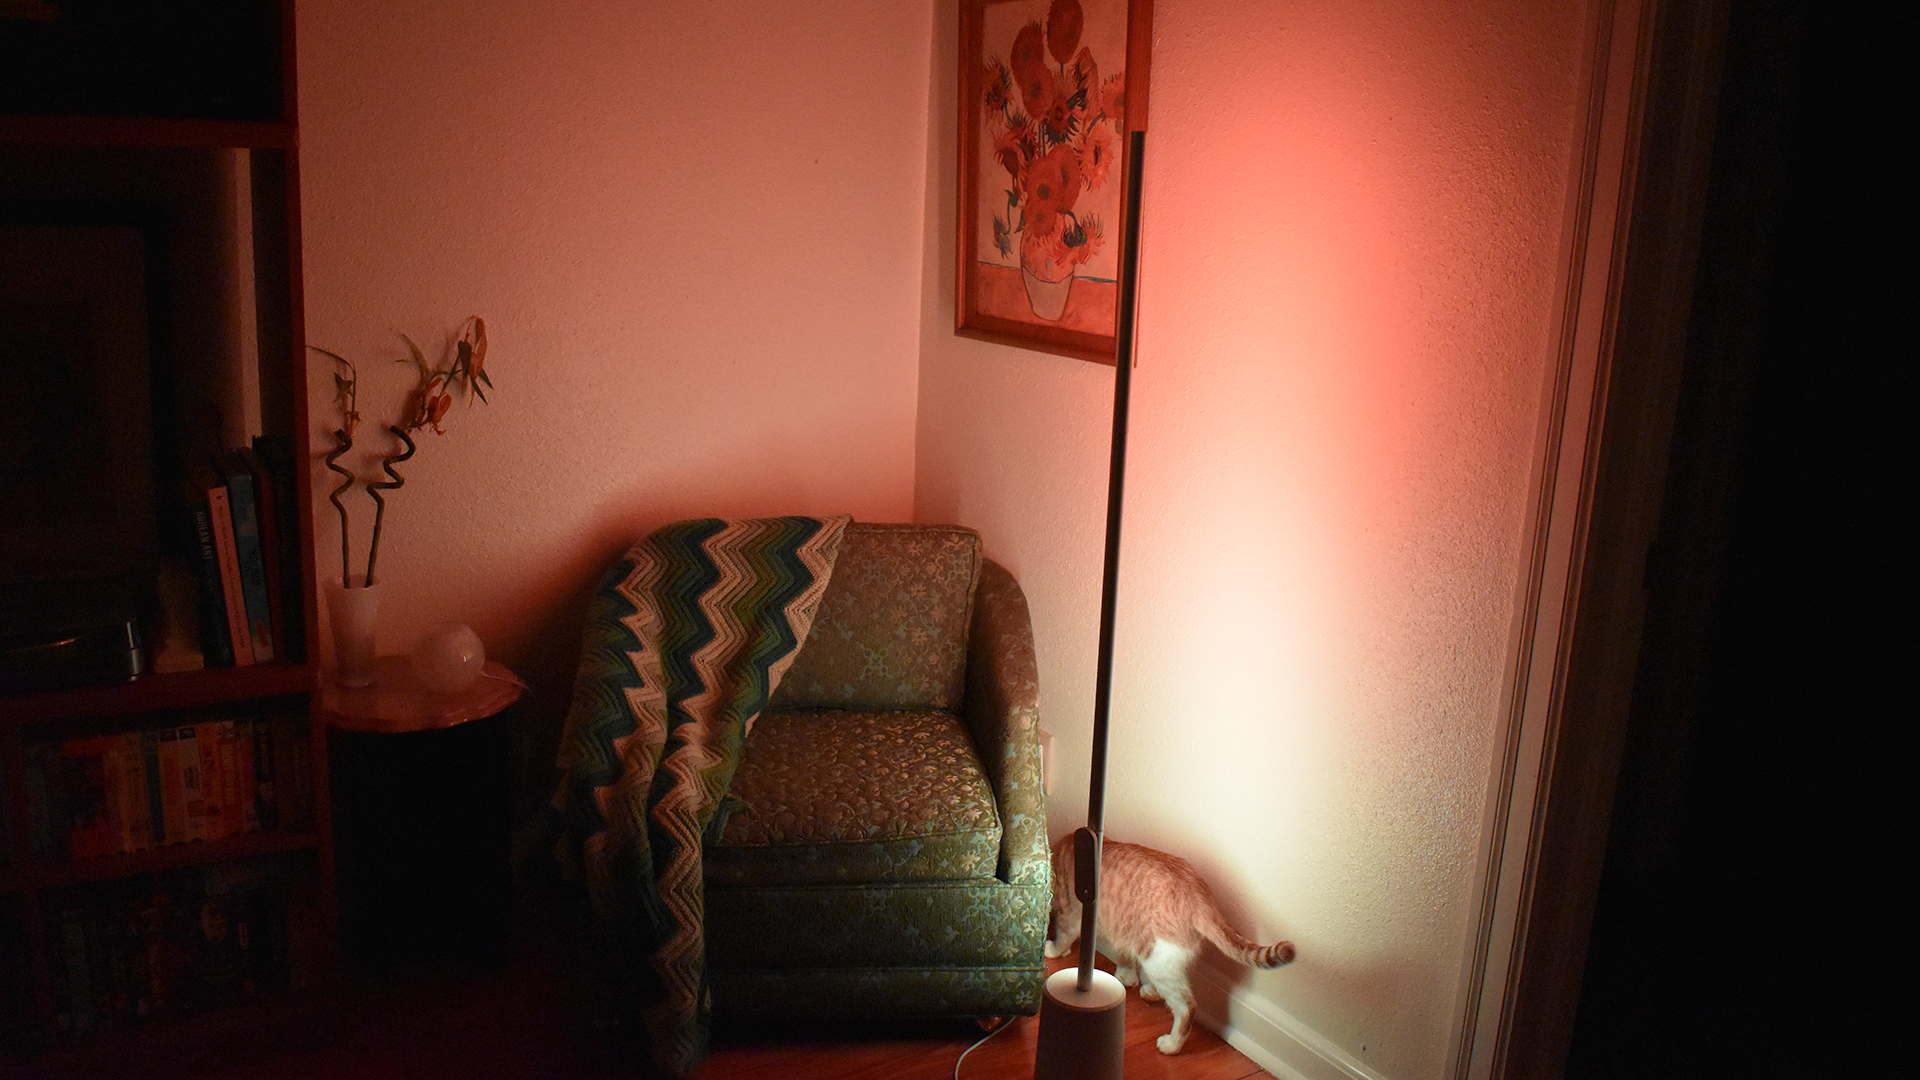 The Lyra lamp shining a green and red light.